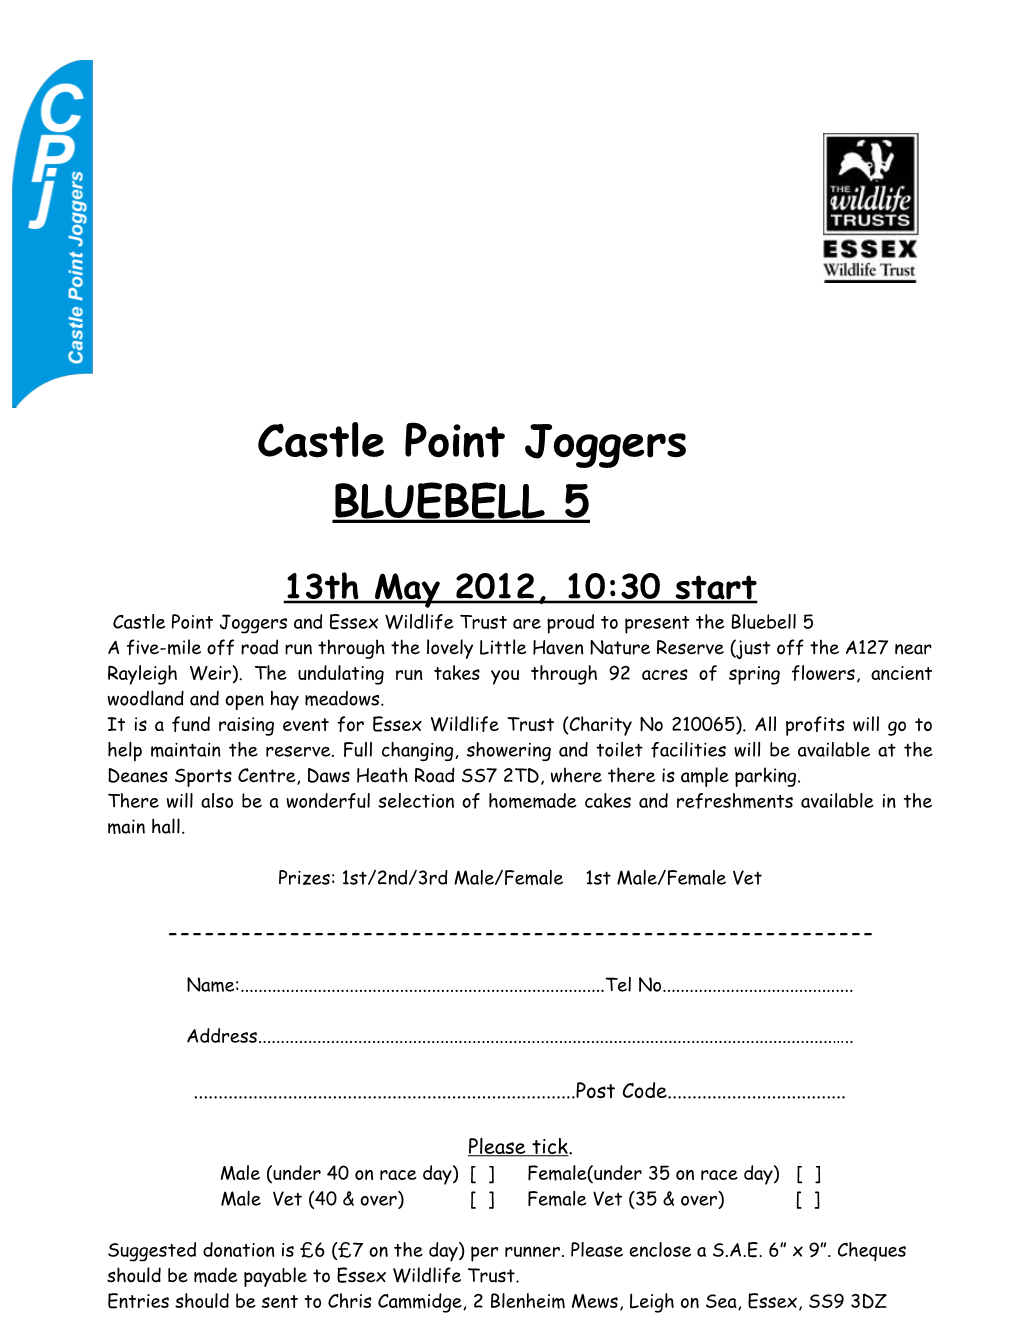 Castle Point Joggers and Essex Wildlife Trust Are Proud to Present the Bluebell 5